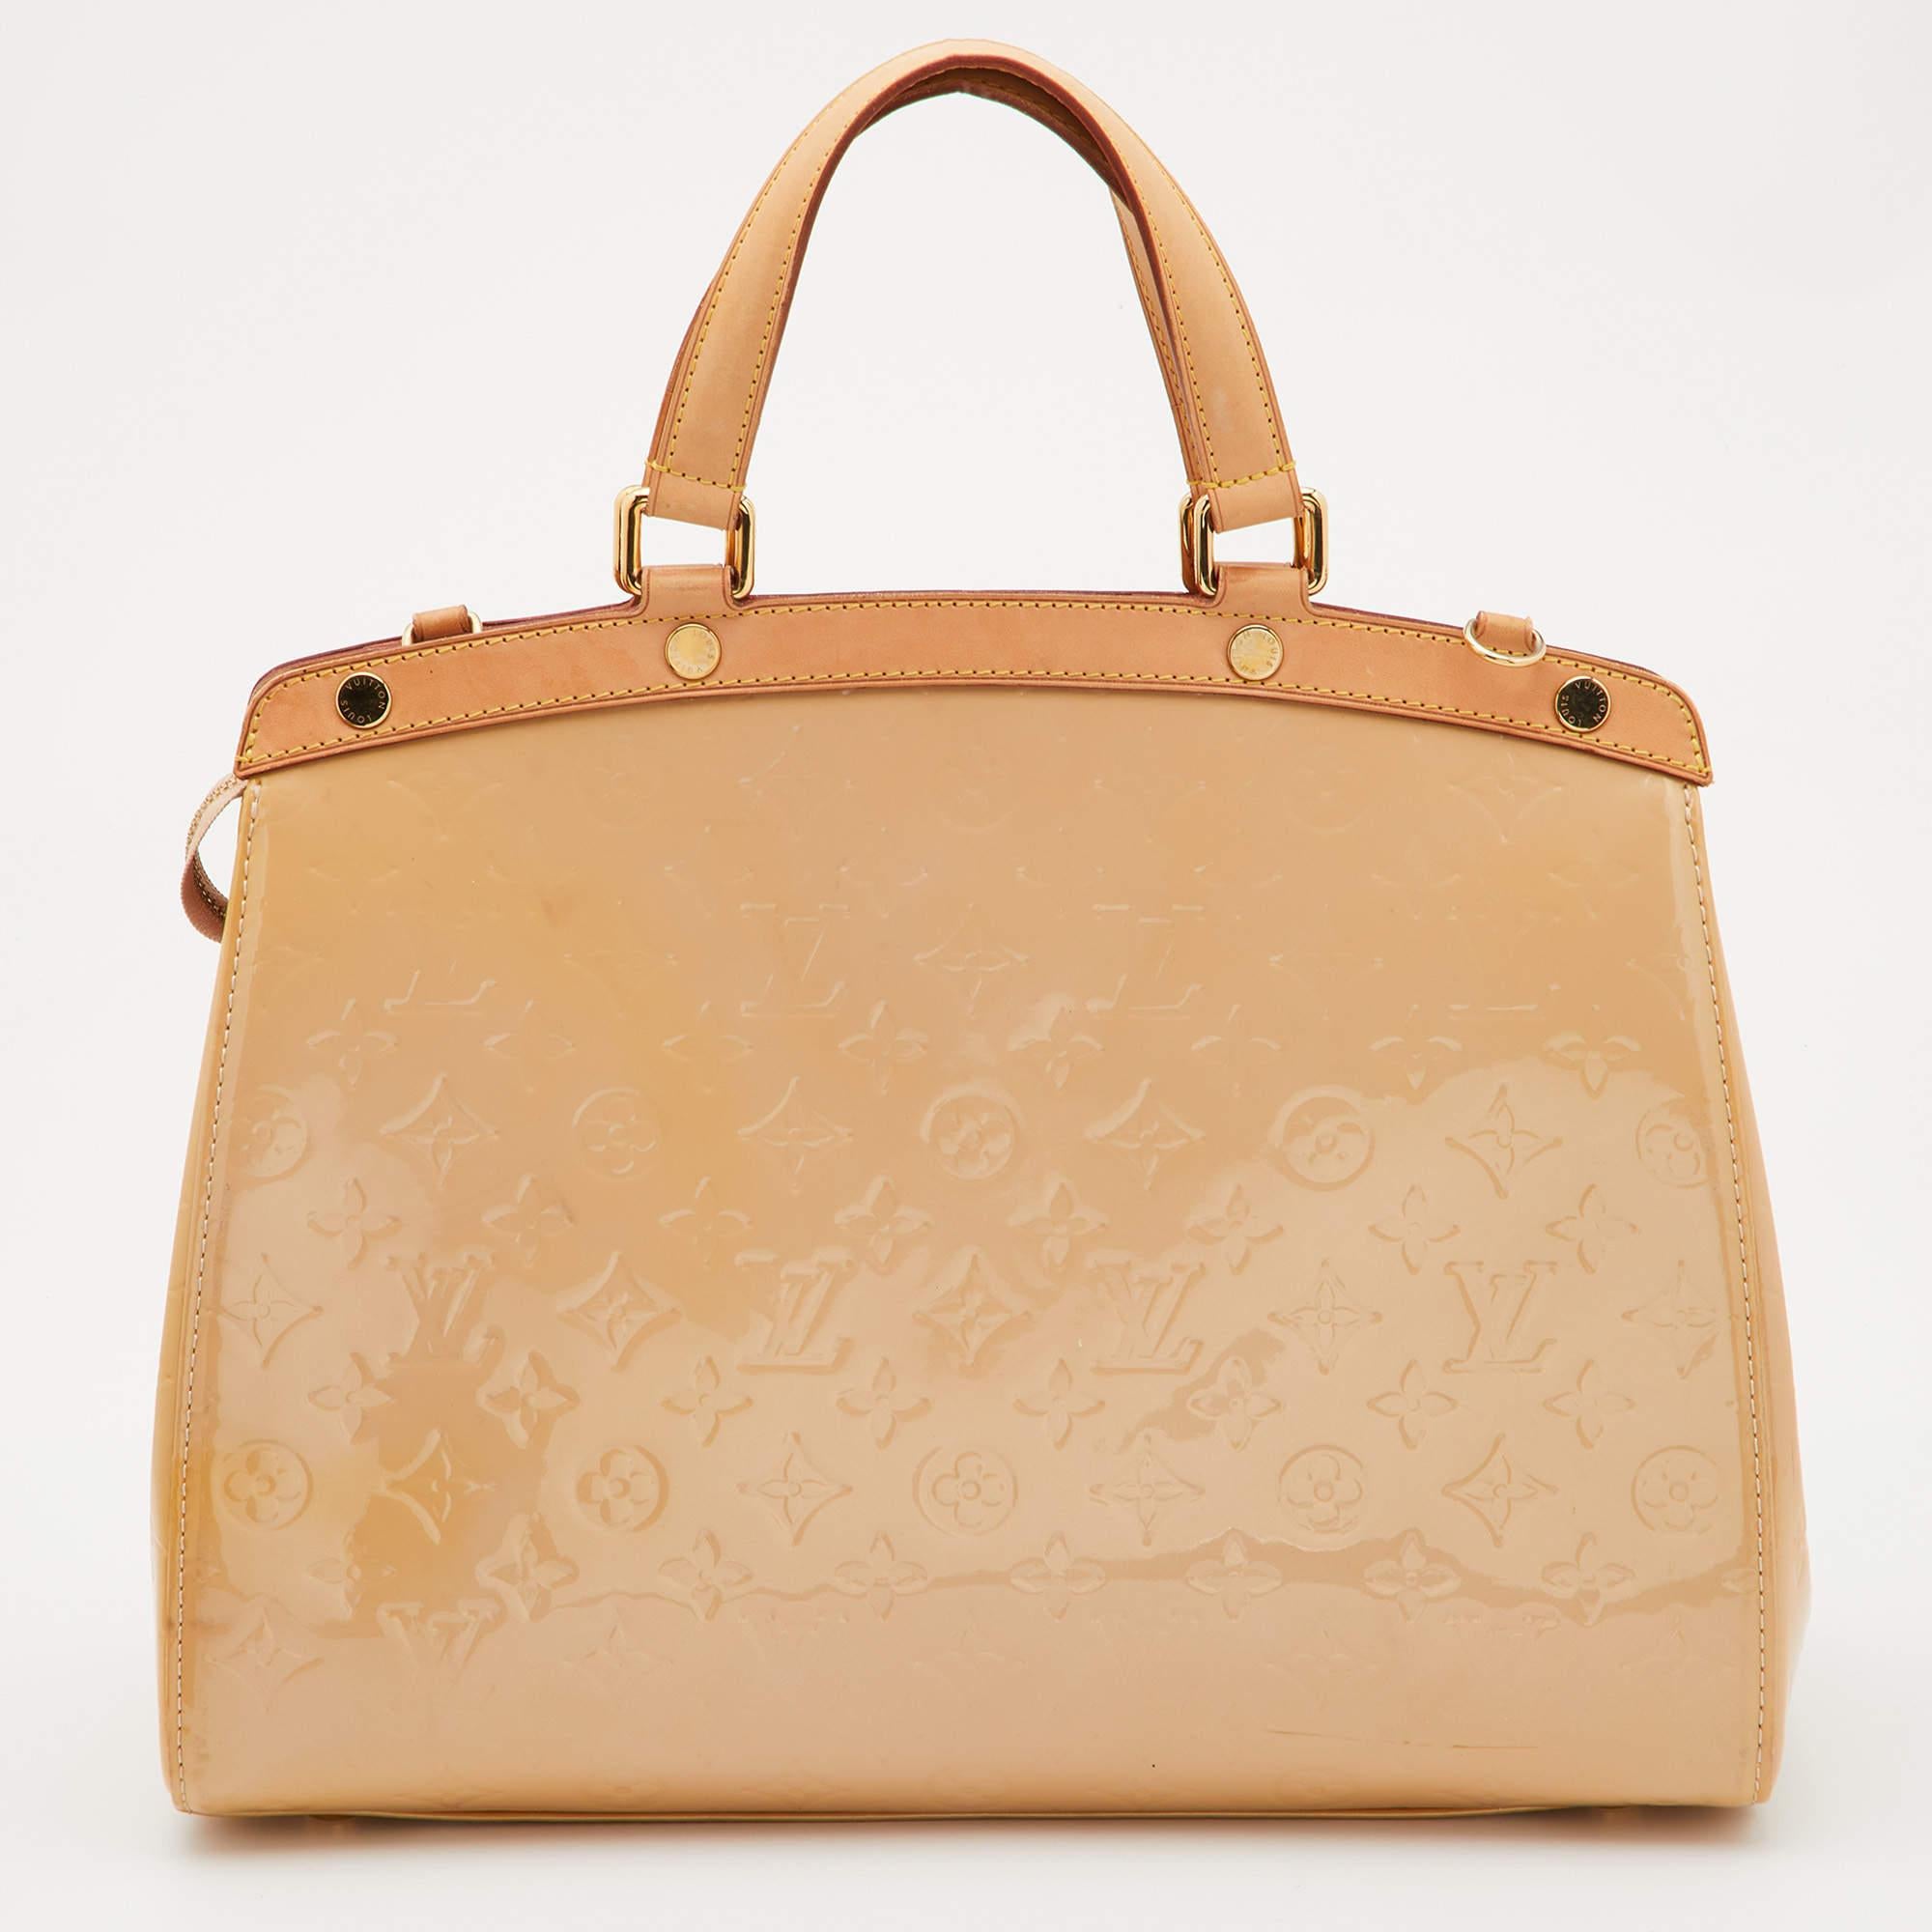 The feminine shape of Louis Vuitton's Brea is inspired by the doctor's bag. Crafted from Monogram Vernis, the bag has a fine finish. The fabric interior is spacious and it is secured by a zipper. The bag features double handles, protective metal